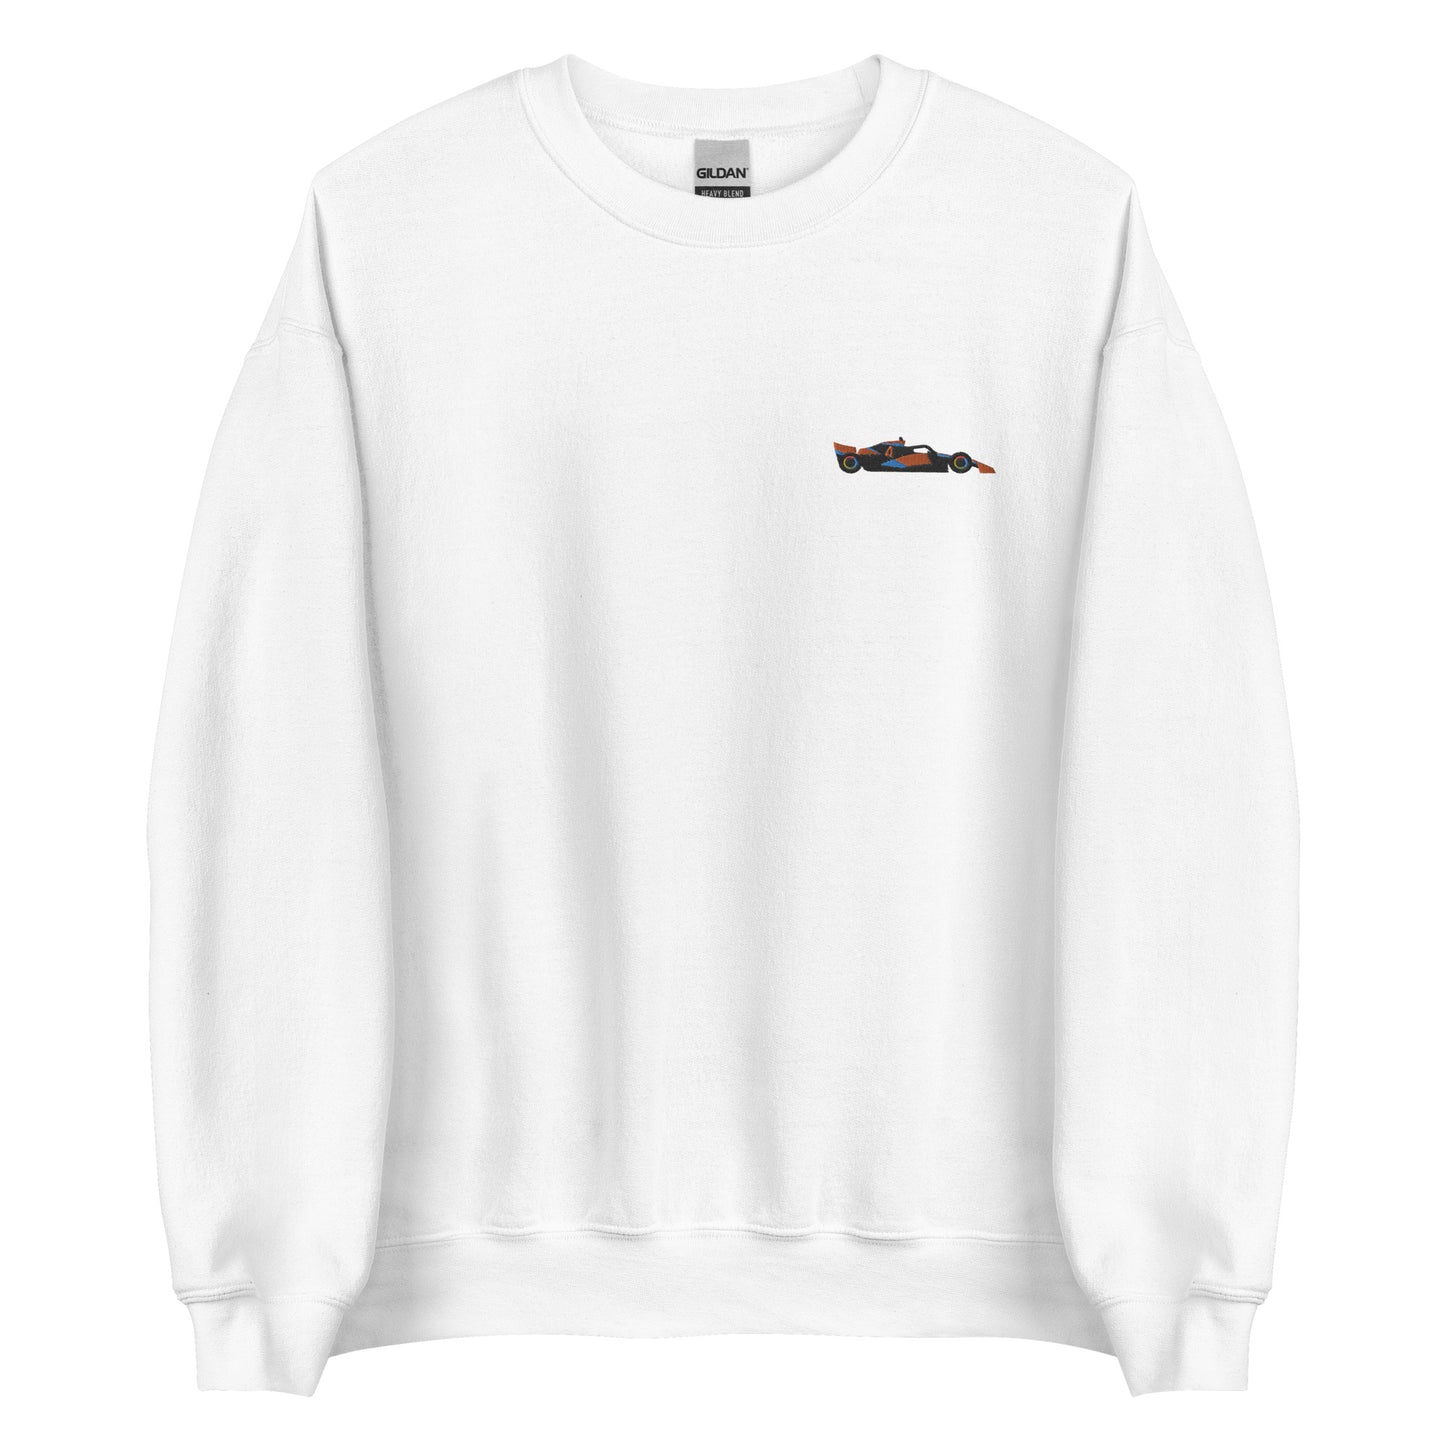 Embroidered mclaren f1 car sweater white